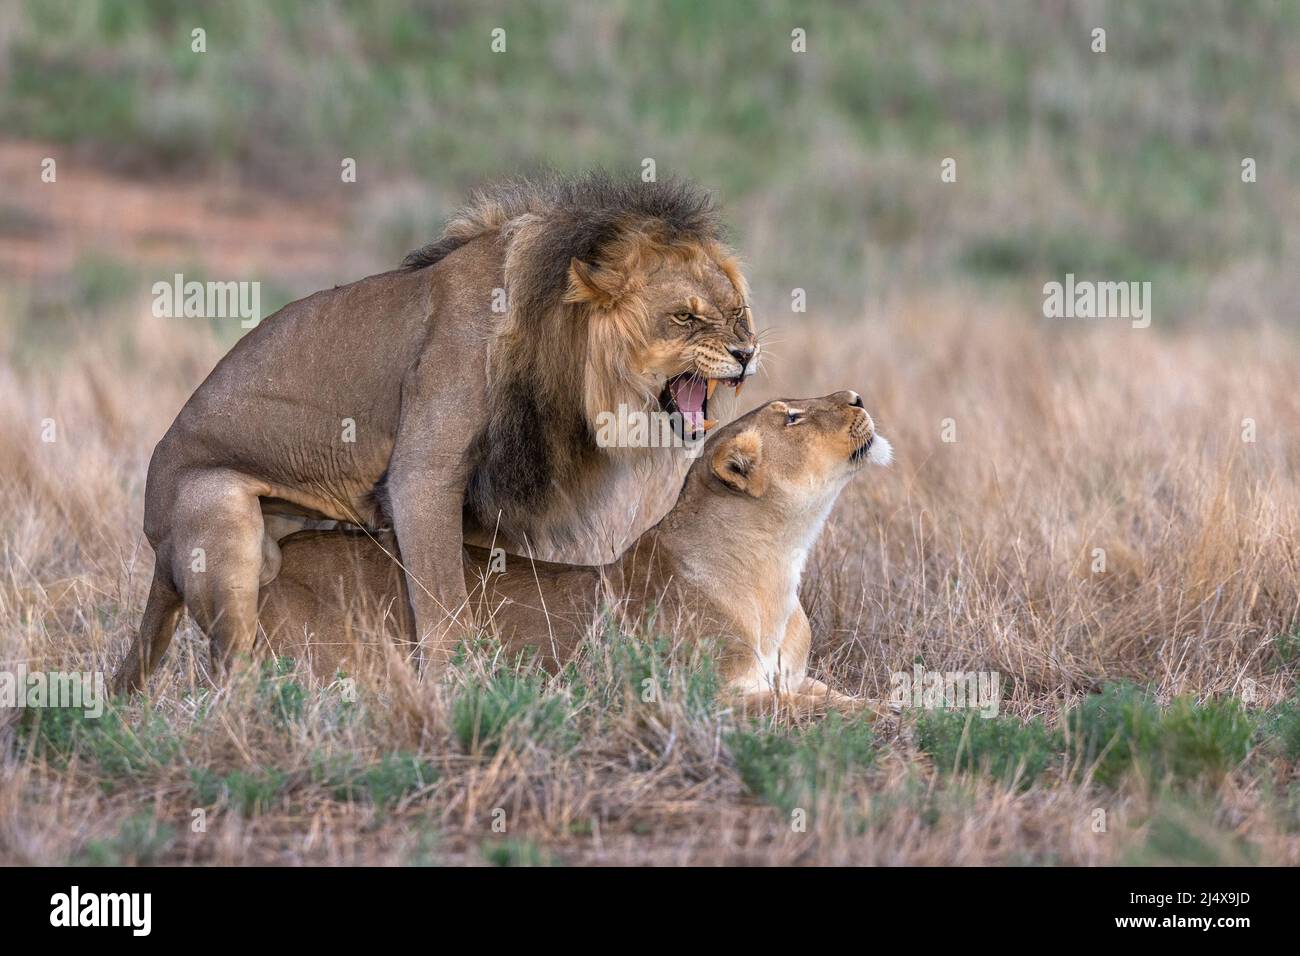 Lions (Panthera leo) mating, Kgalagadi transfrontier park, Northern Cape, South Africa Stock Photo